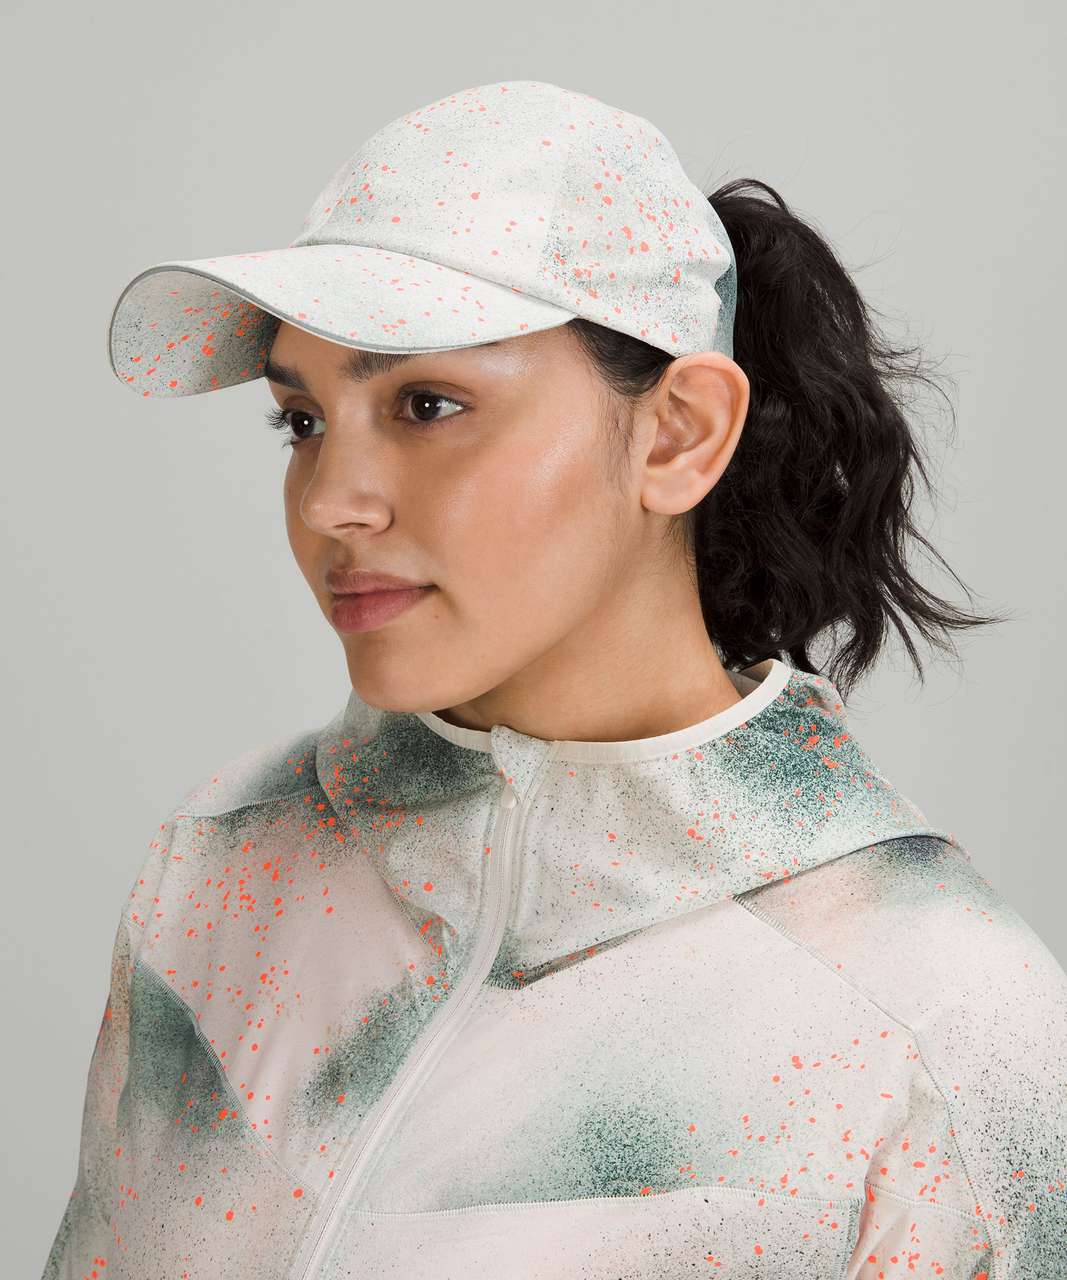 Lululemon Womens Fast and Free Ponytail Running Hat - Spray Camo Silver Blue Multi